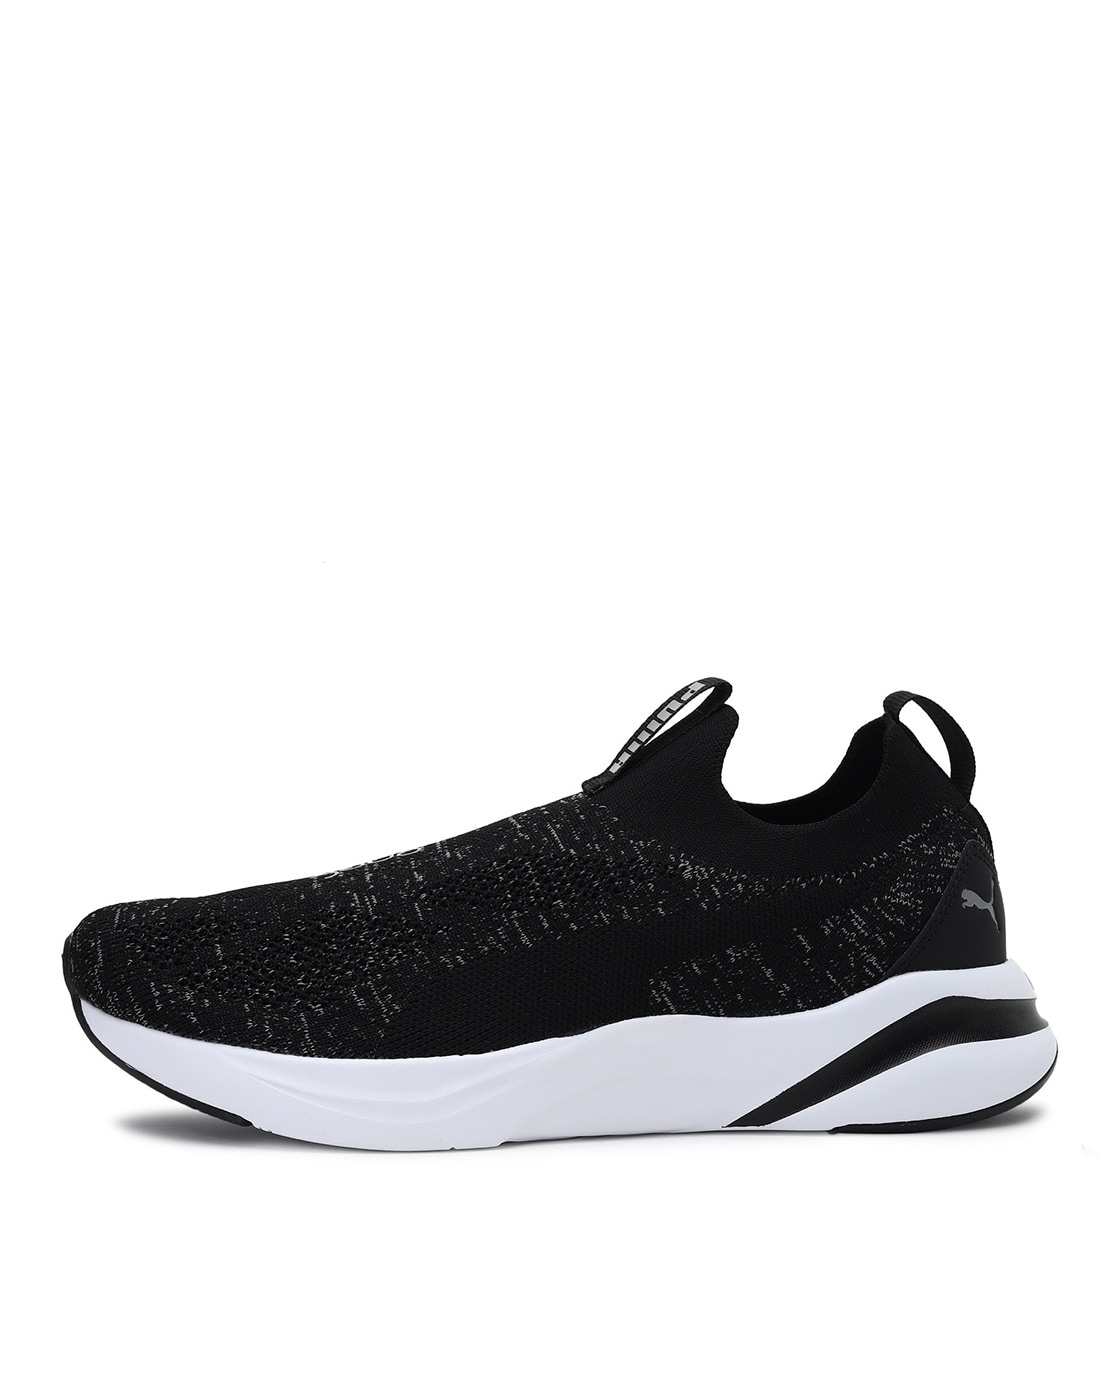 Buy Puma Basket Classic one8 Classic Sneakers Shoes For Men (Black) Online  at Low Prices in India - Paytmmall.com